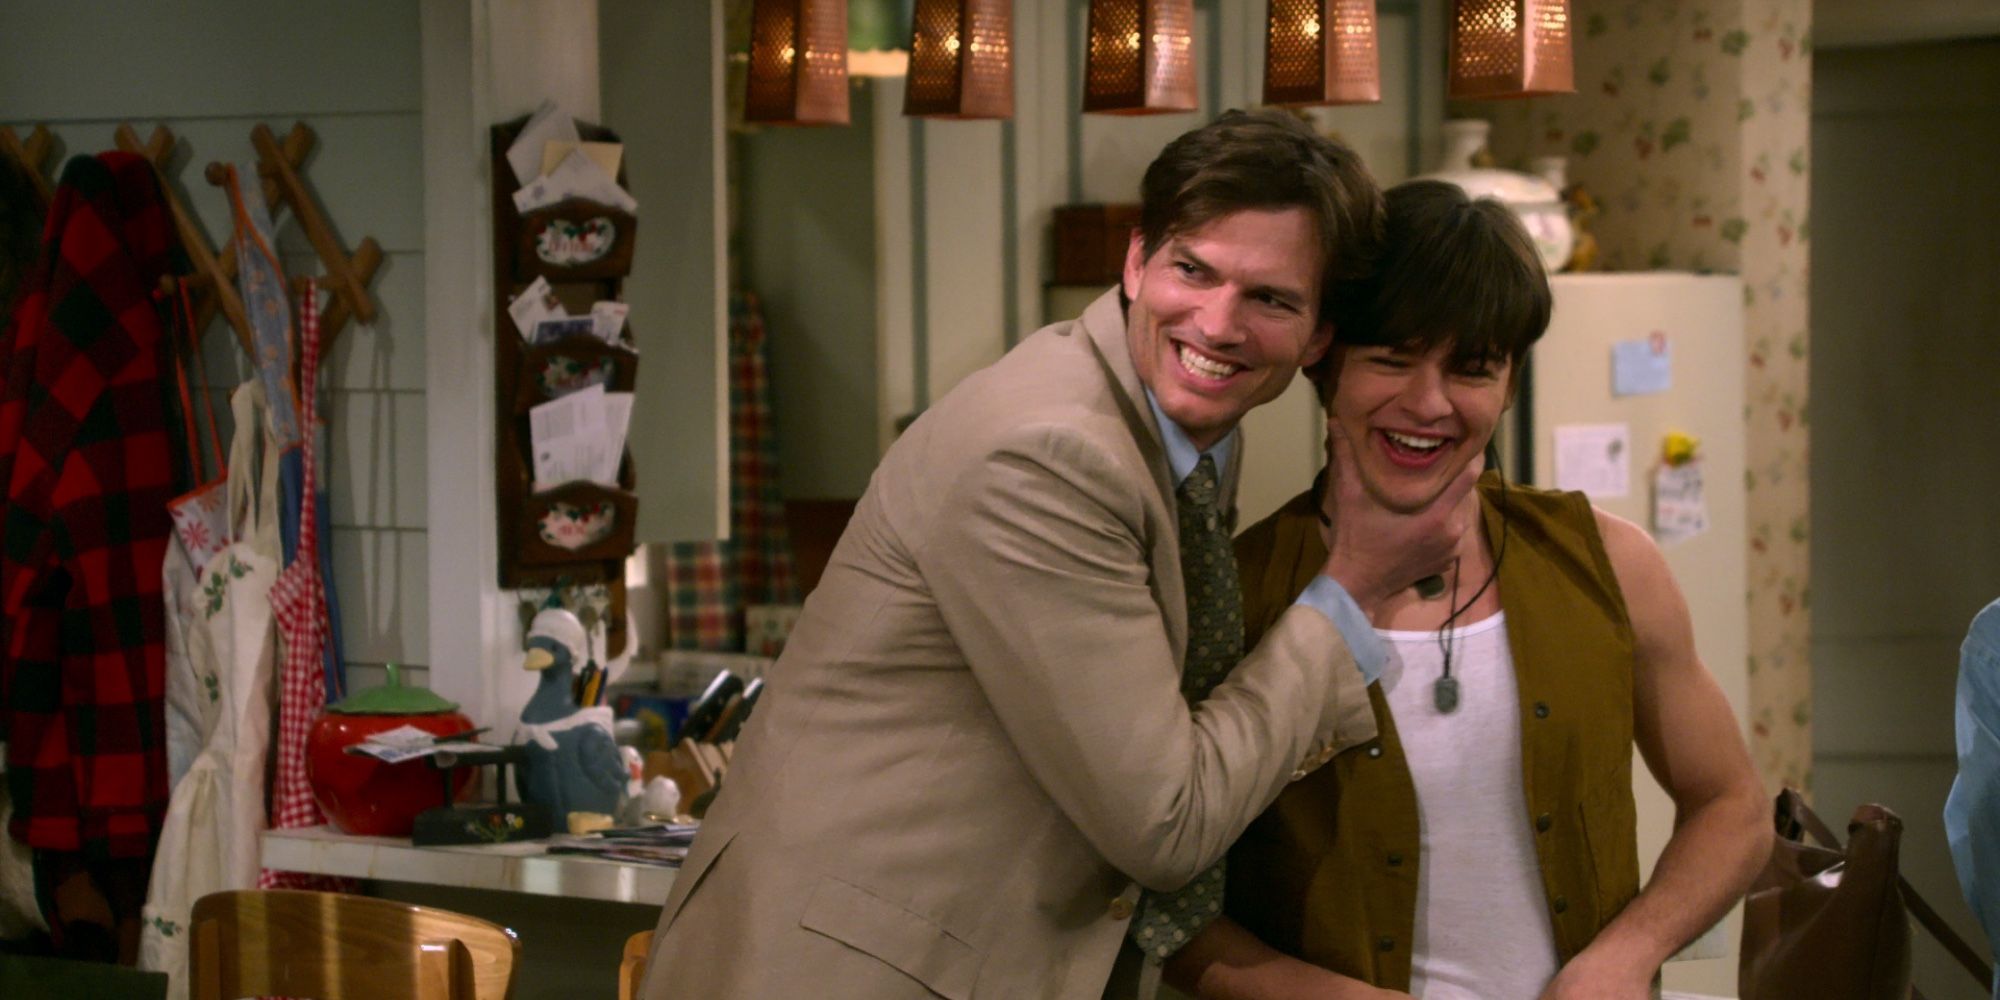 Ashton Kutcher as Michael Kelso and Mace Coronel as Jay Kelso in That 90s Show season 1